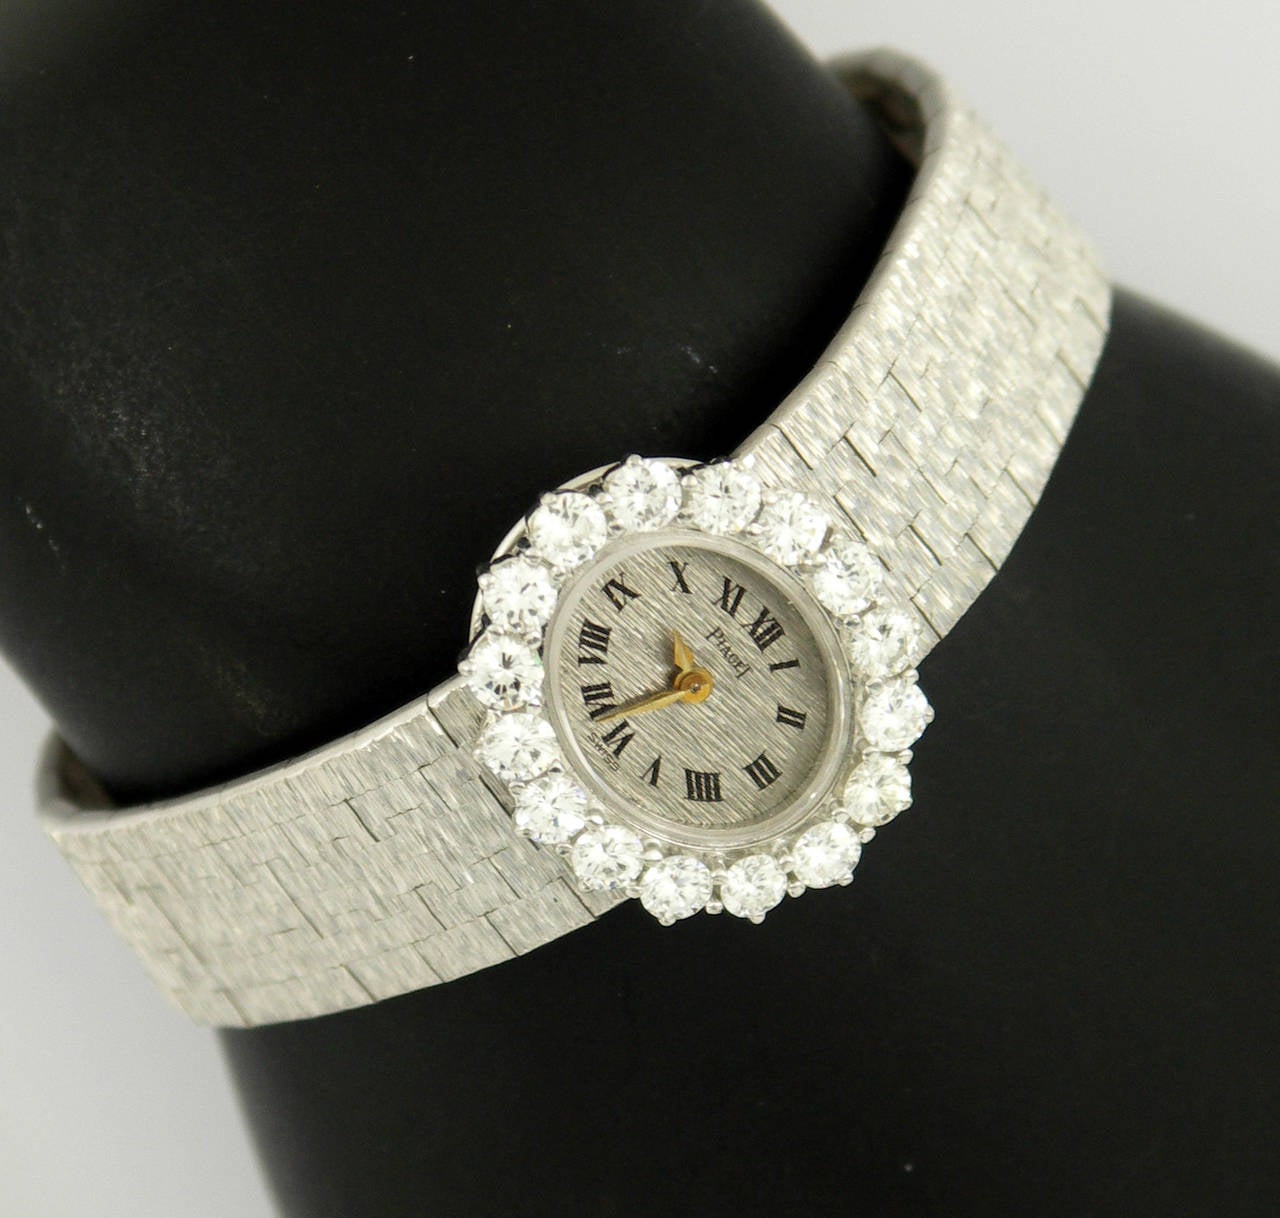 An 18K white gold ladies Piaget wristwatch, with white gold dial and black, Roman numerals. Surrounding the watch is a bezel set with 16 round brilliant cut diamonds, weighing 2.33ct total approximate weight. The bezel measures 20mm X 24mm, and the